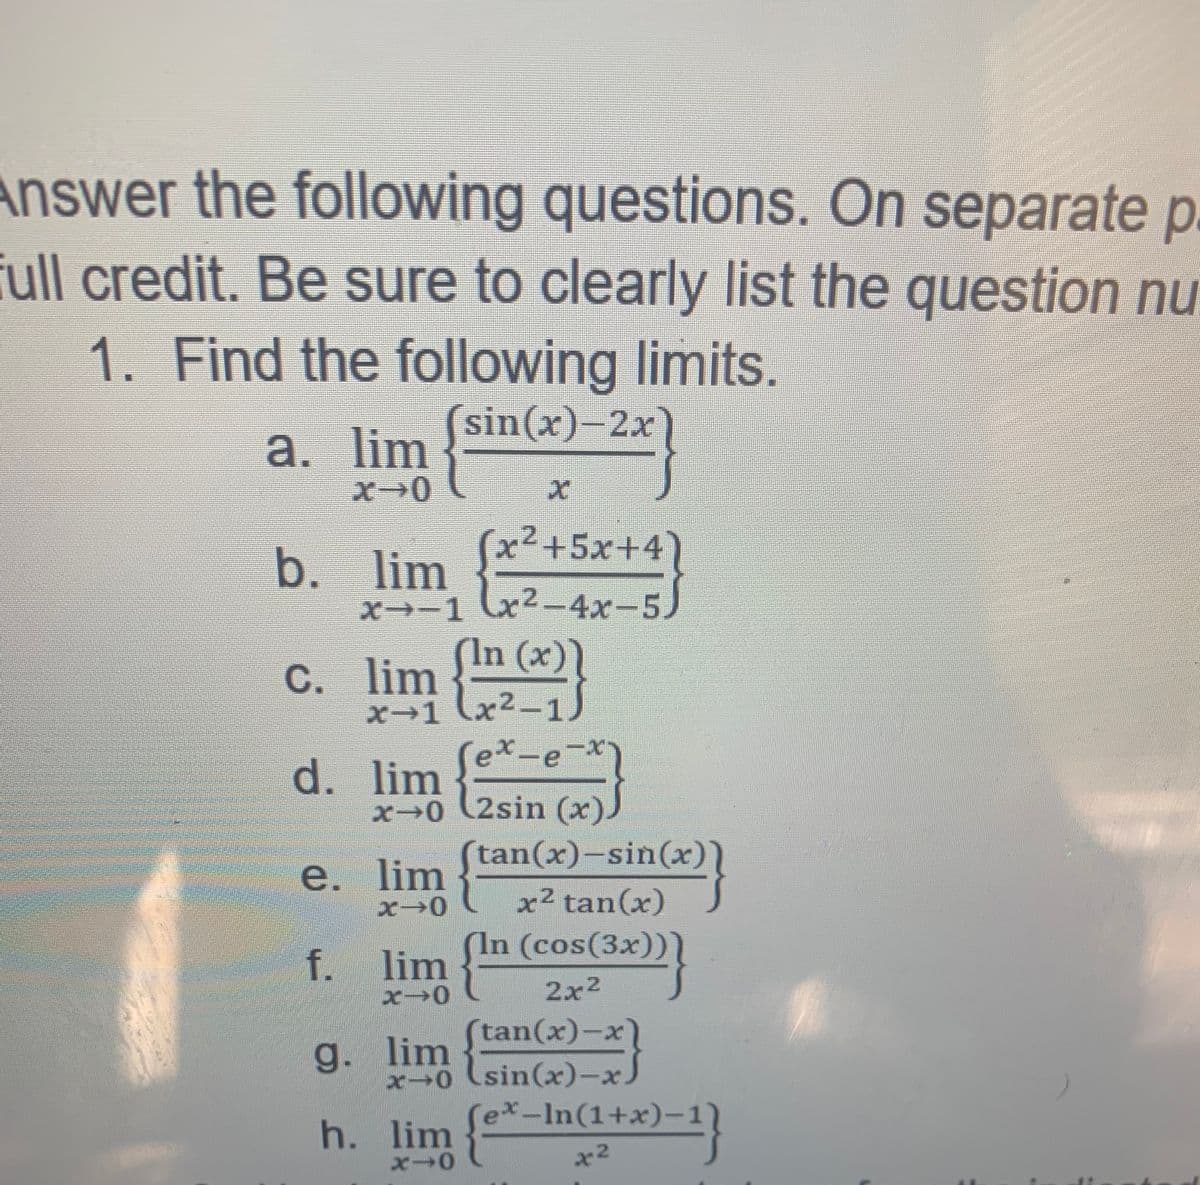 a. lim
Answer the following questions. On separate p
full credit. Be sure to clearly list the question nu
1. Find the following limits.
sin(x)-2x
a. lim
b. lim
( )
x²+5x+4
x-1 x2-4x-5)
x²-4x-
In (x
C. lim
x→1 (x2-1
ex-e-x
d. lim
x0 (2sin (x)
tan(x)-sin(x
e. lim
x2 tan(x)
(In (cos(3x))
f. lim
2x2
(tan(x)-x)
g.
. lim
x0 (sin(x)-x
x-In(1+x)-1
h. lim
